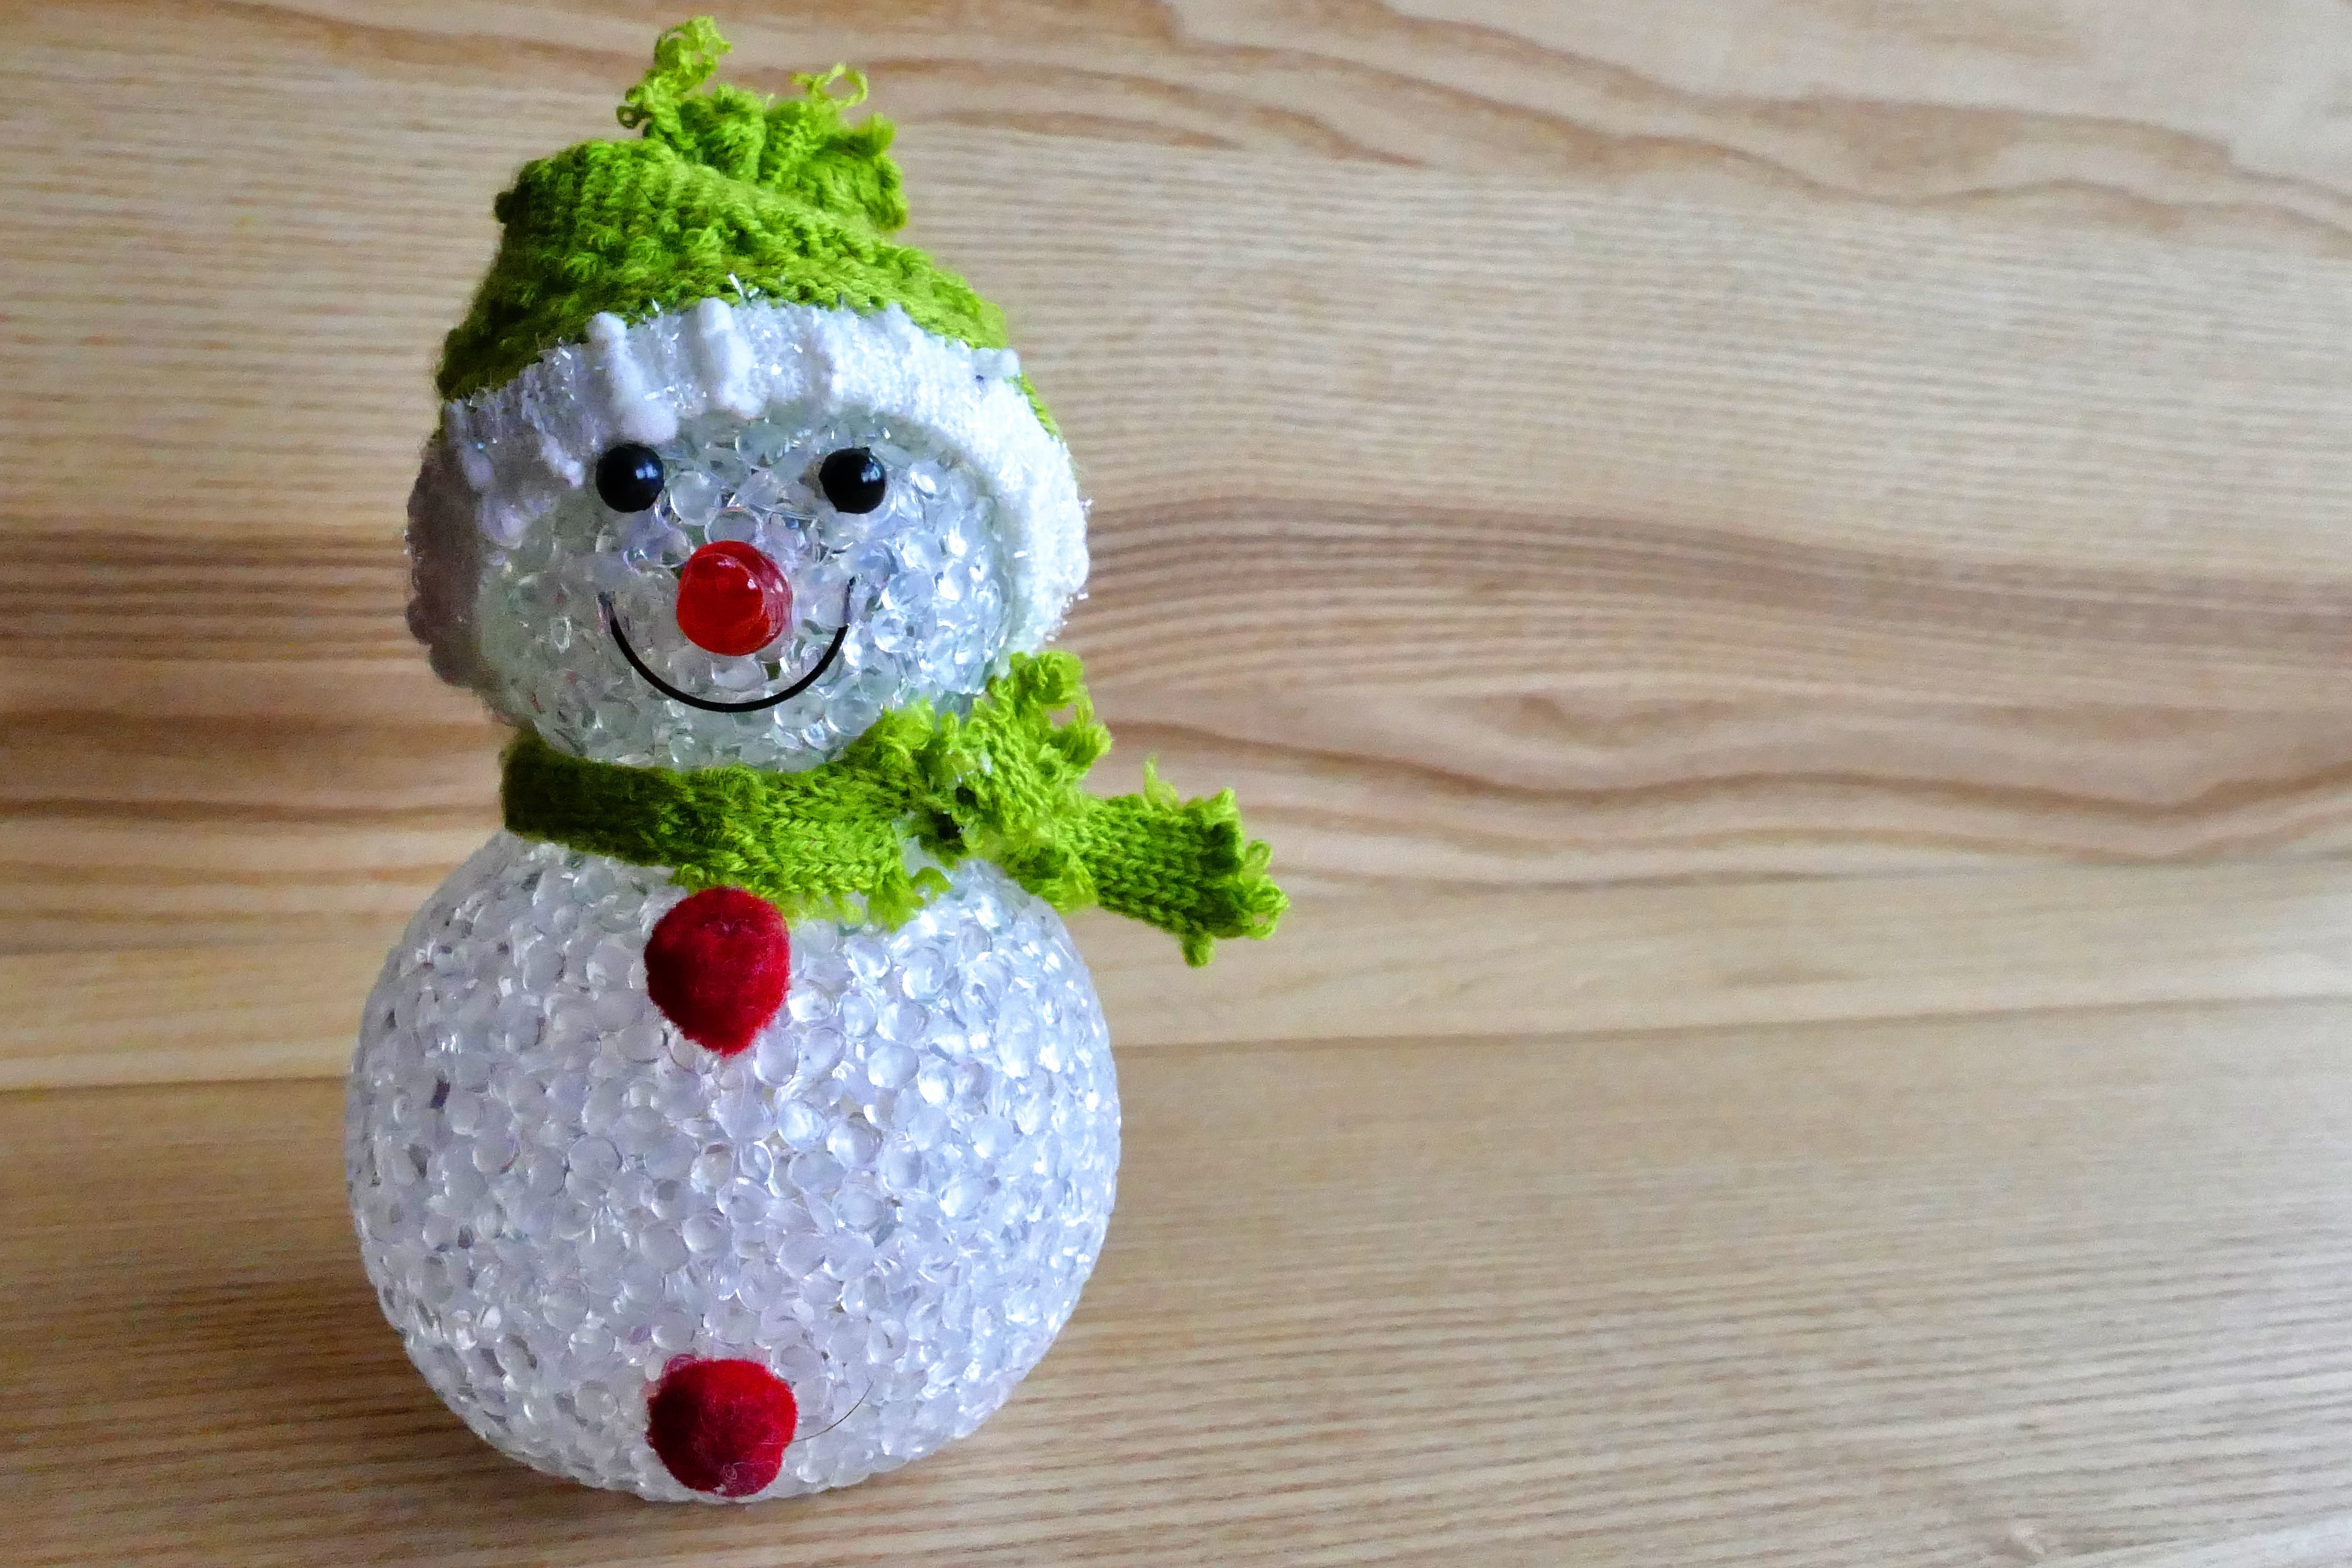 Decoration, Holiday, Snowman, Christmas, no people, wood - material